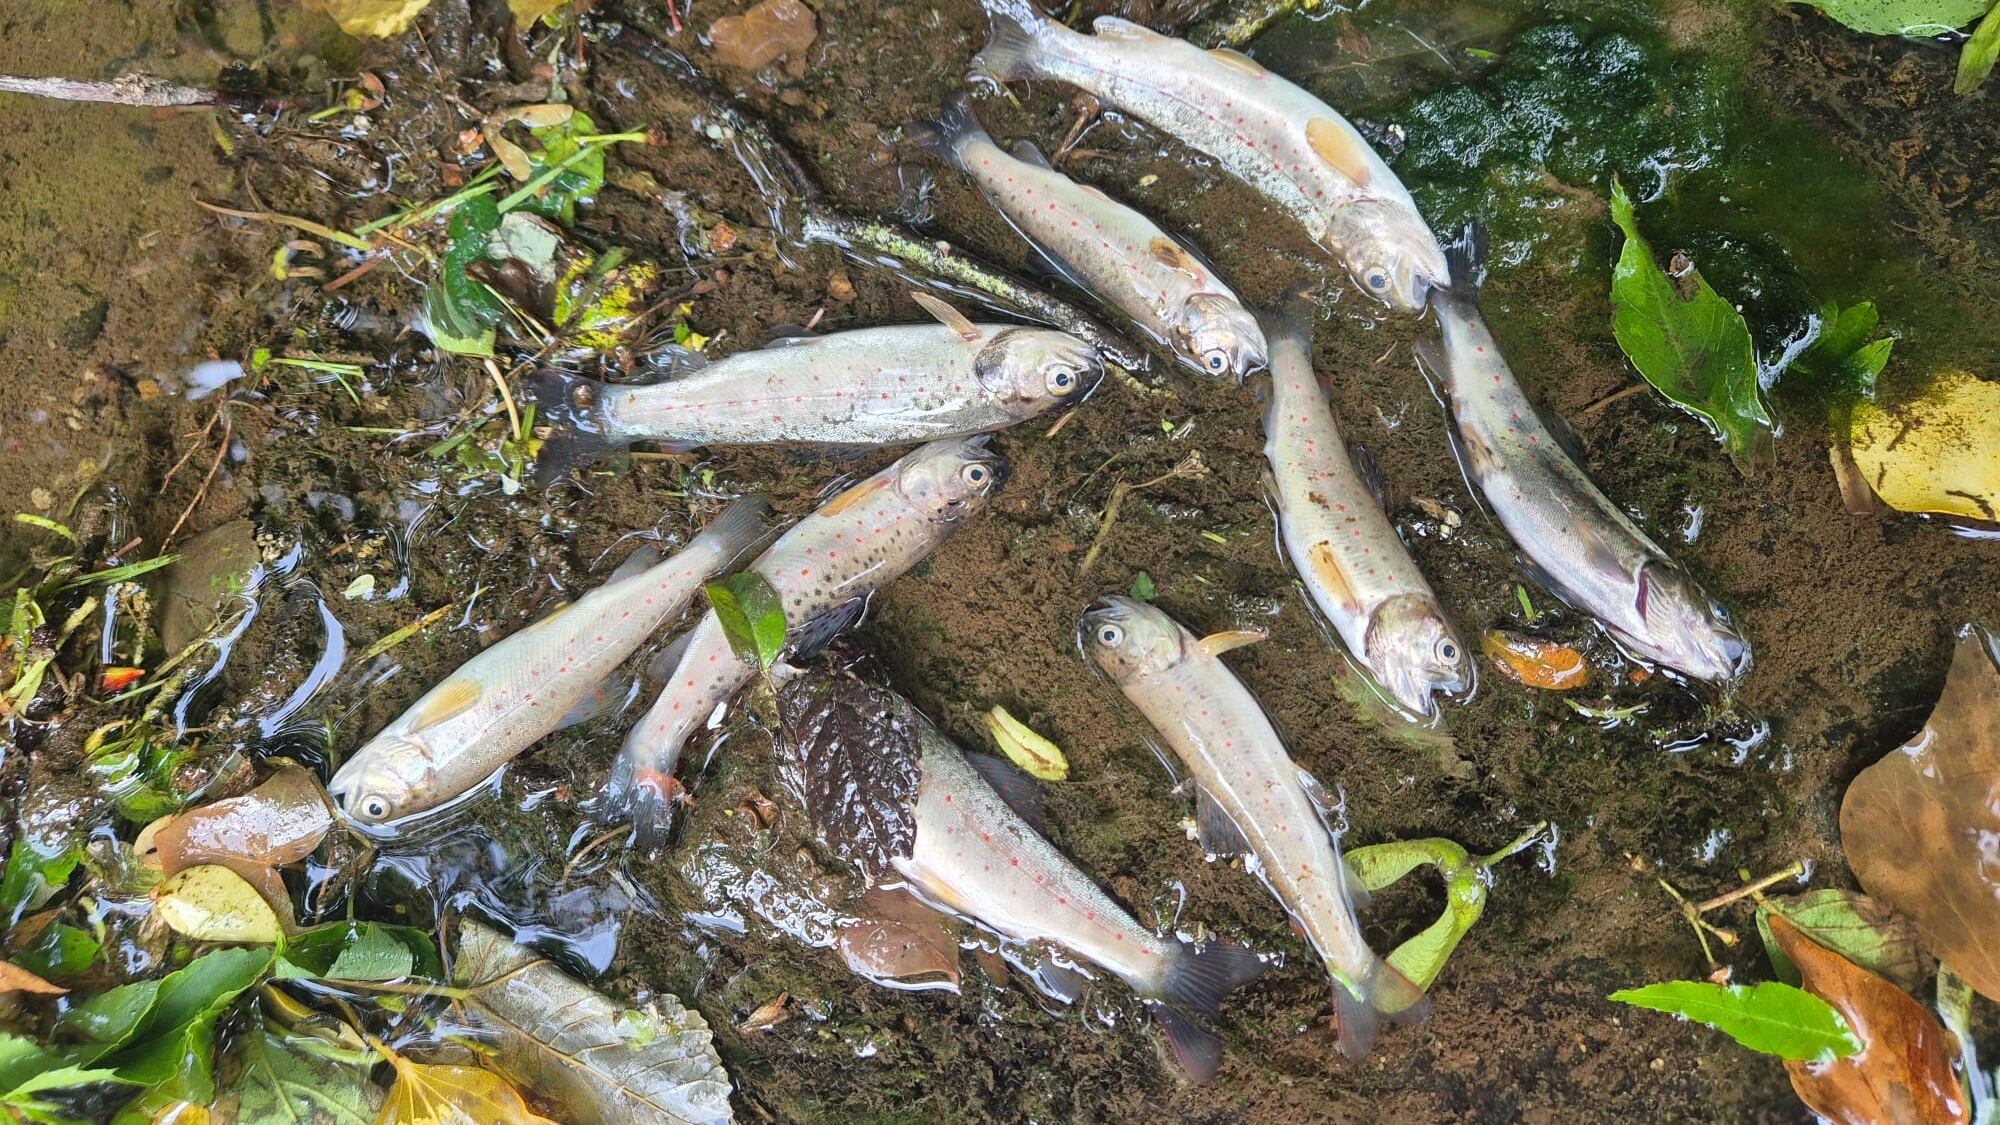 Inland Fisheries Ireland said the fish kill included juvenile Atlantic salmon, brown trout and European eel.